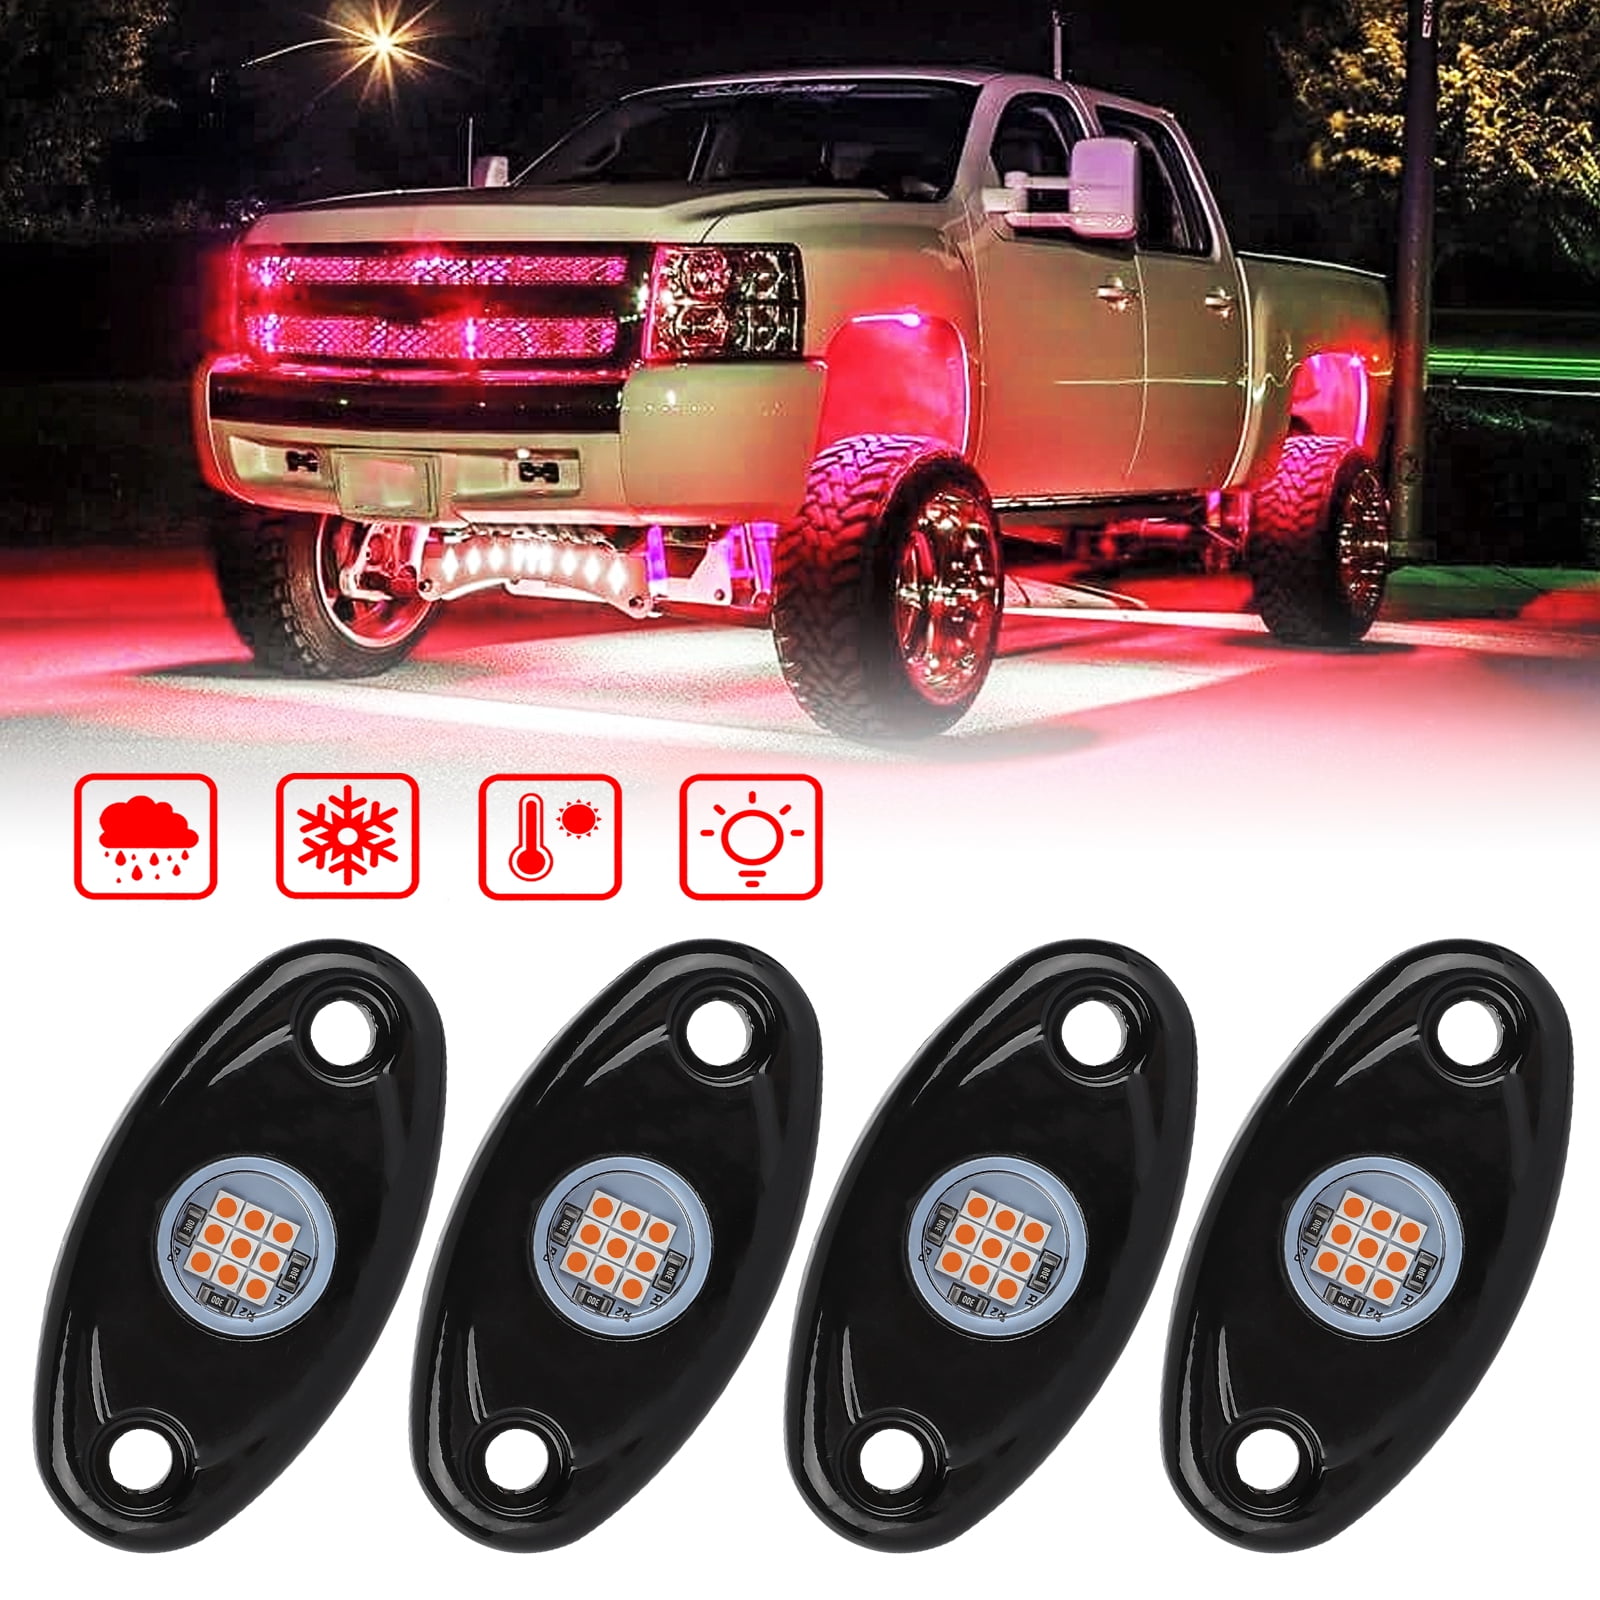 Catinbow 4 Pods LED Rock Light Kits Car Truck JEEP ATV SUV UTV Offroad Motorcycle Underbody Glow Trail Rig Lights Waterproof IP68 Red 